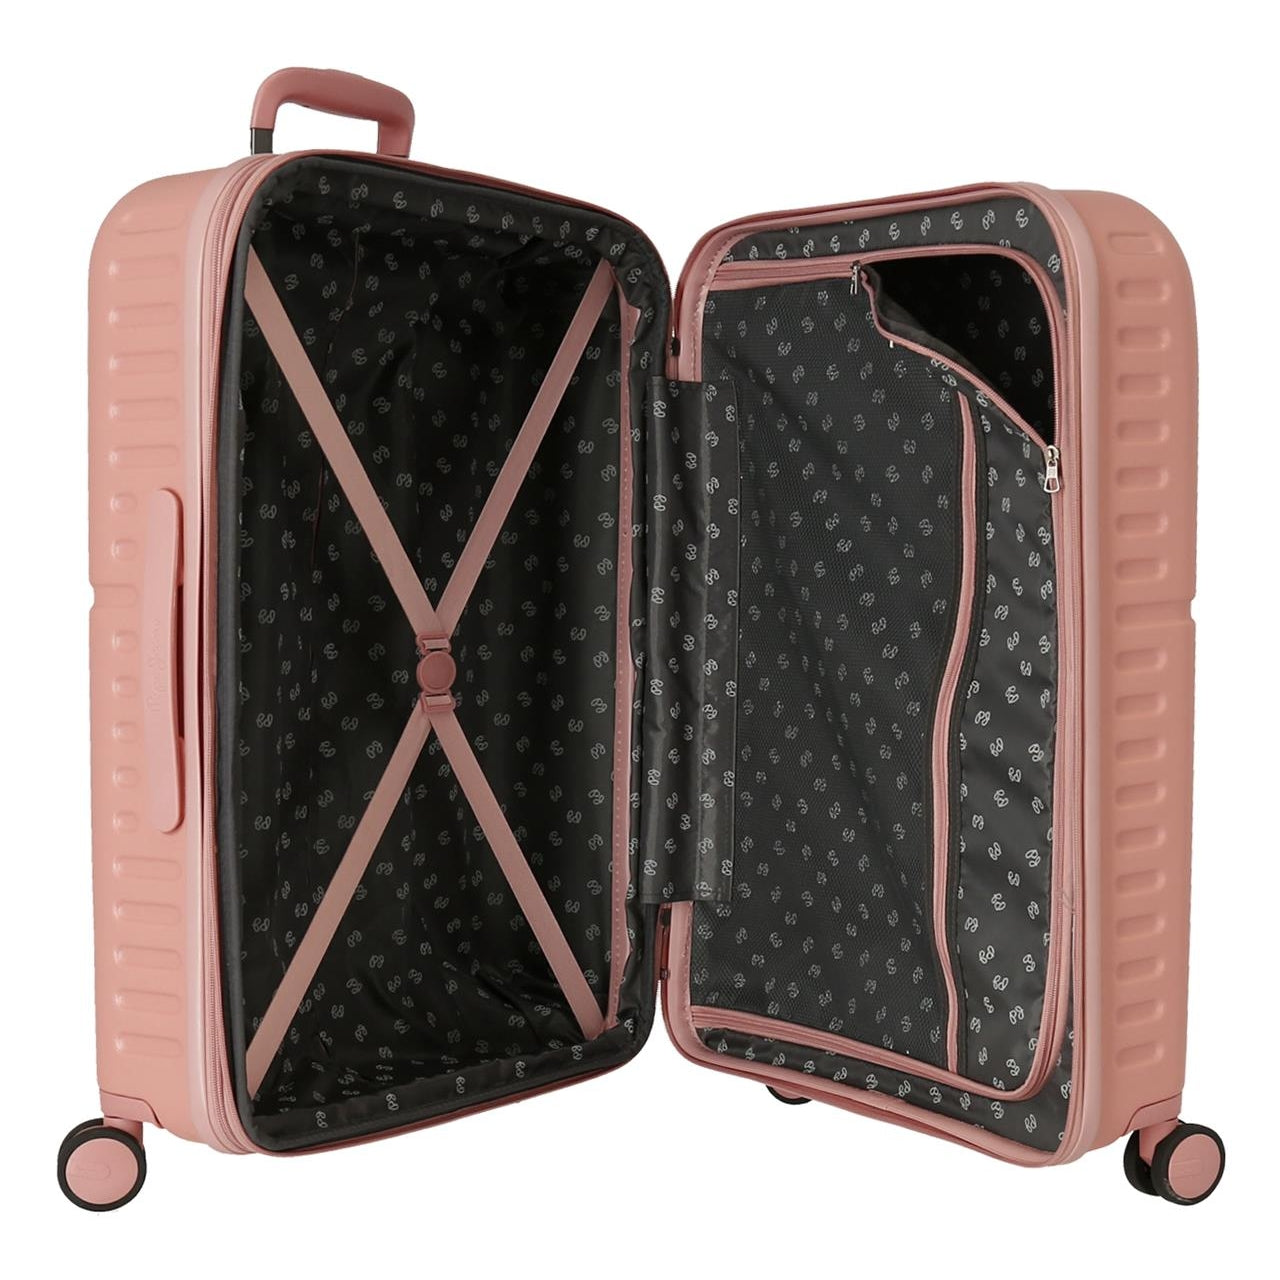 Valise Moyenne Extensible Pepe Jeans Laila rose clair 70cm